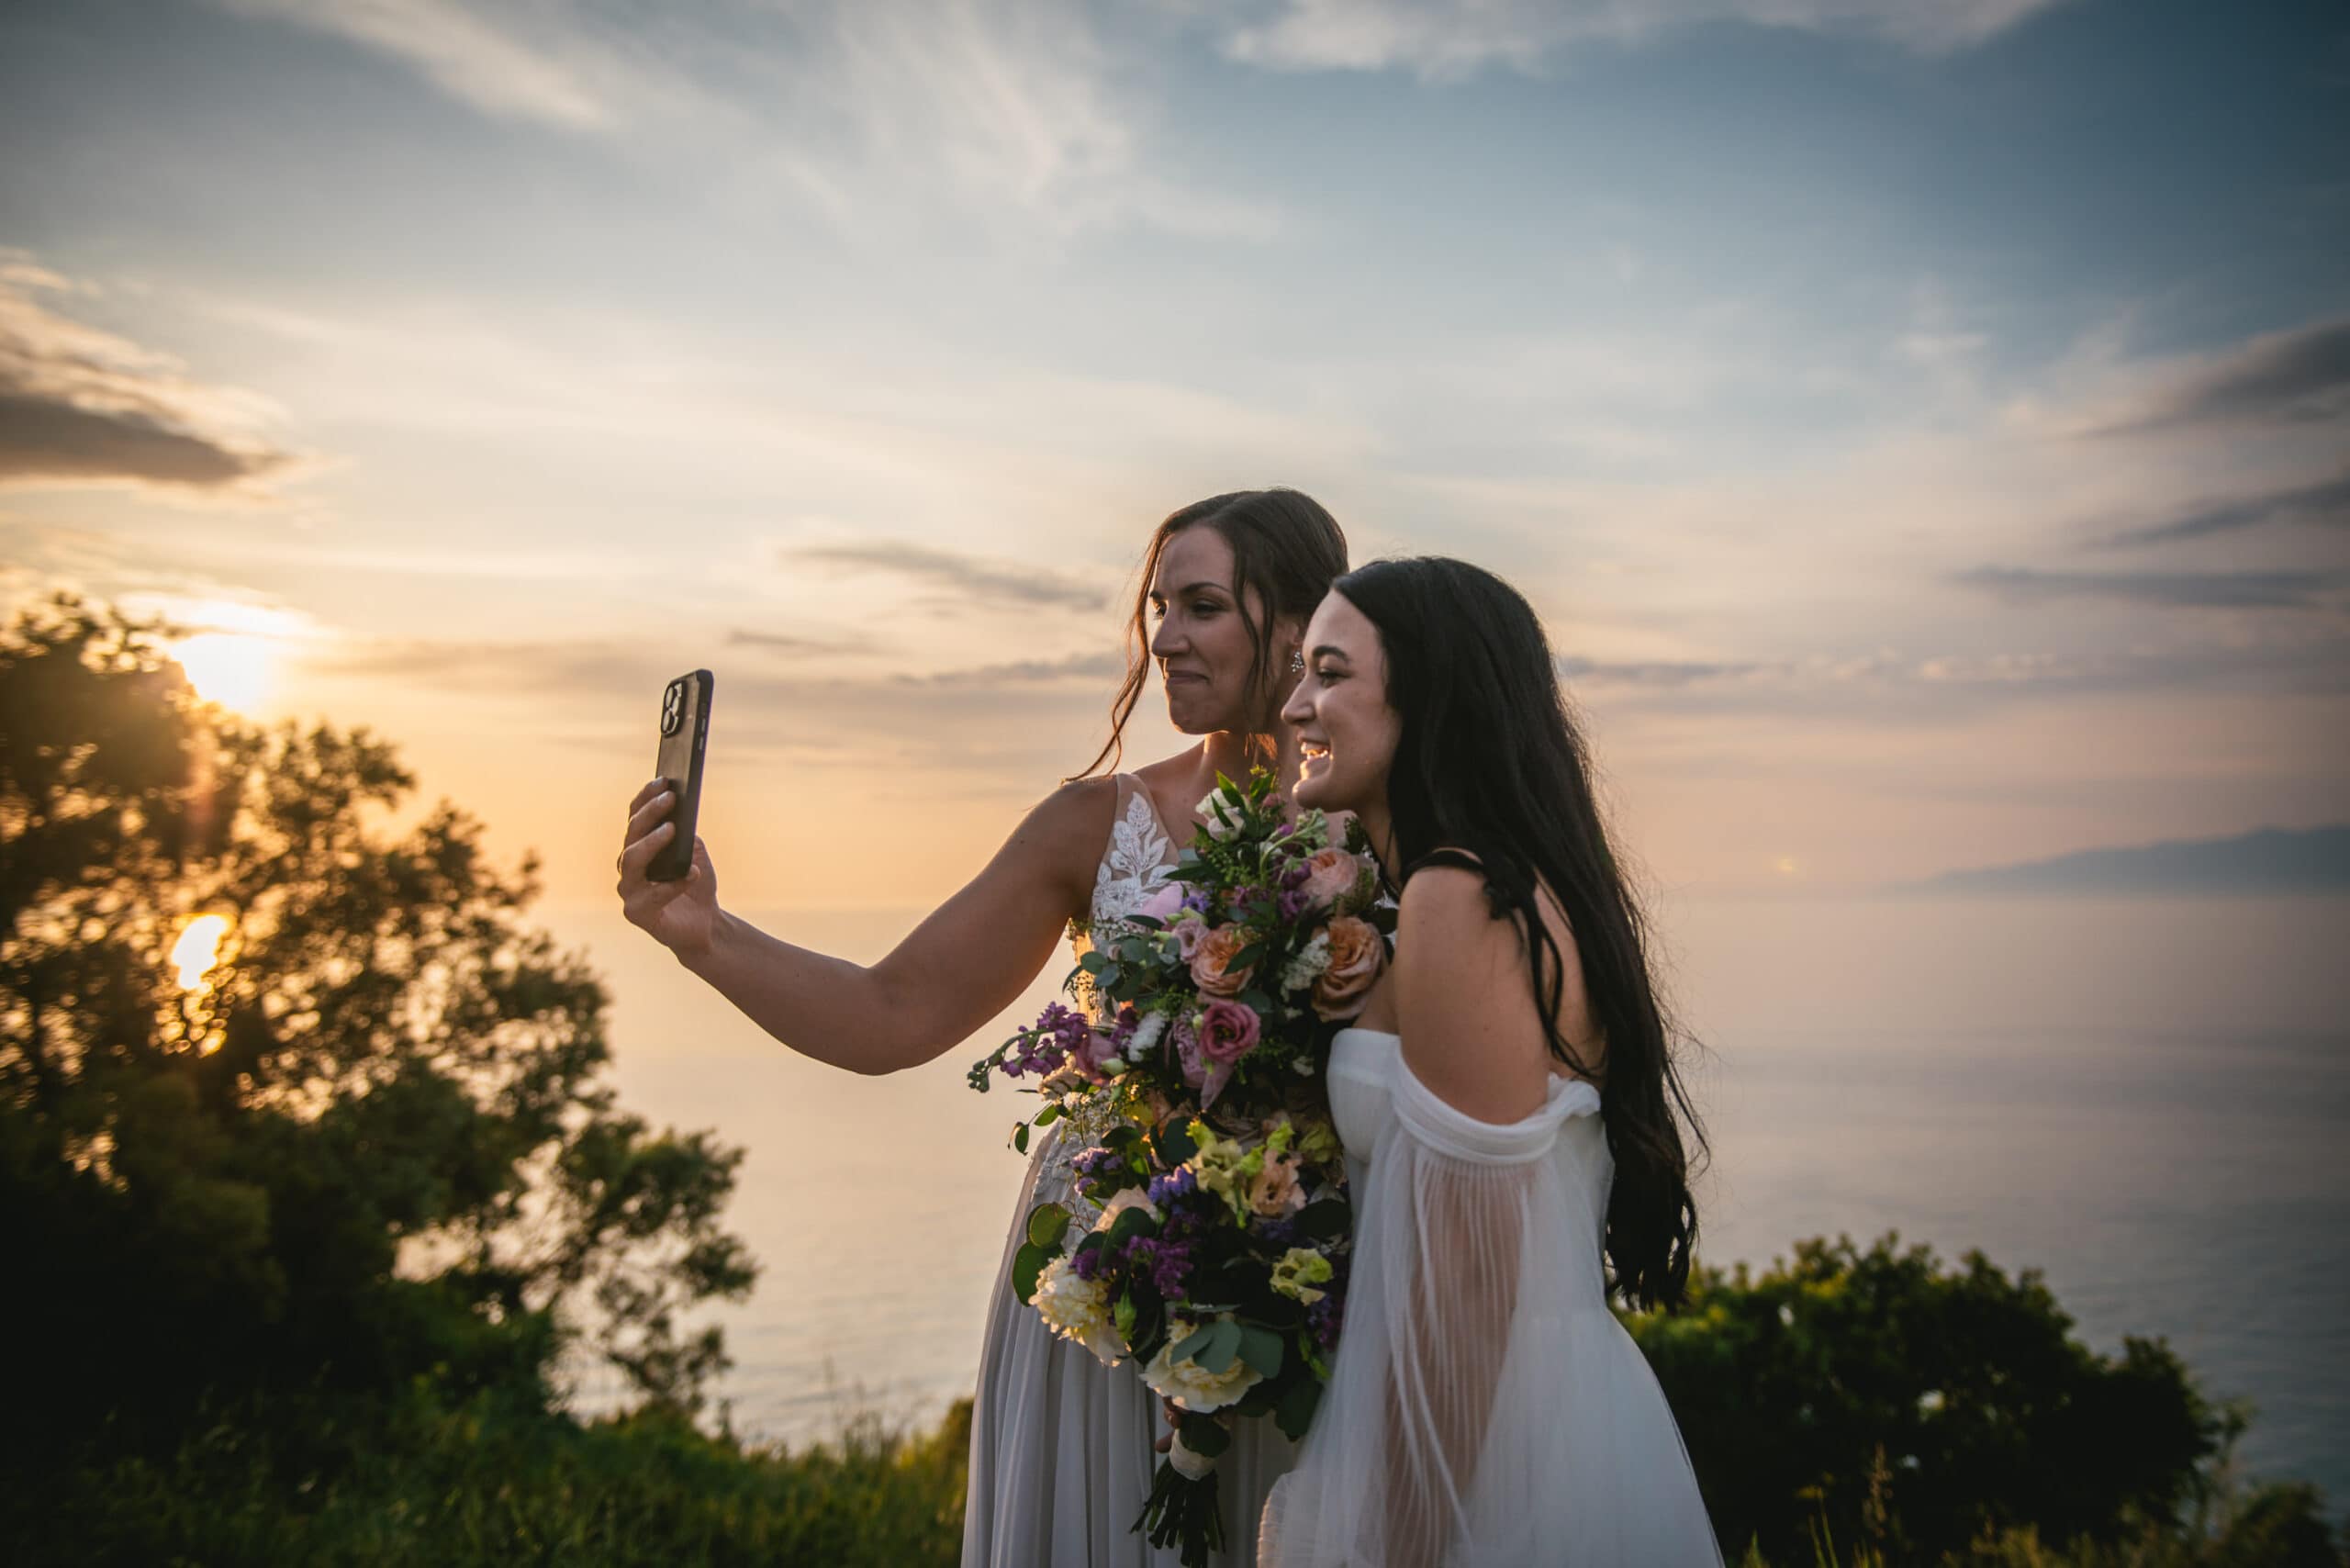 Brides sharing virtual moments with families, uniting hearts in their Corfu elopement.